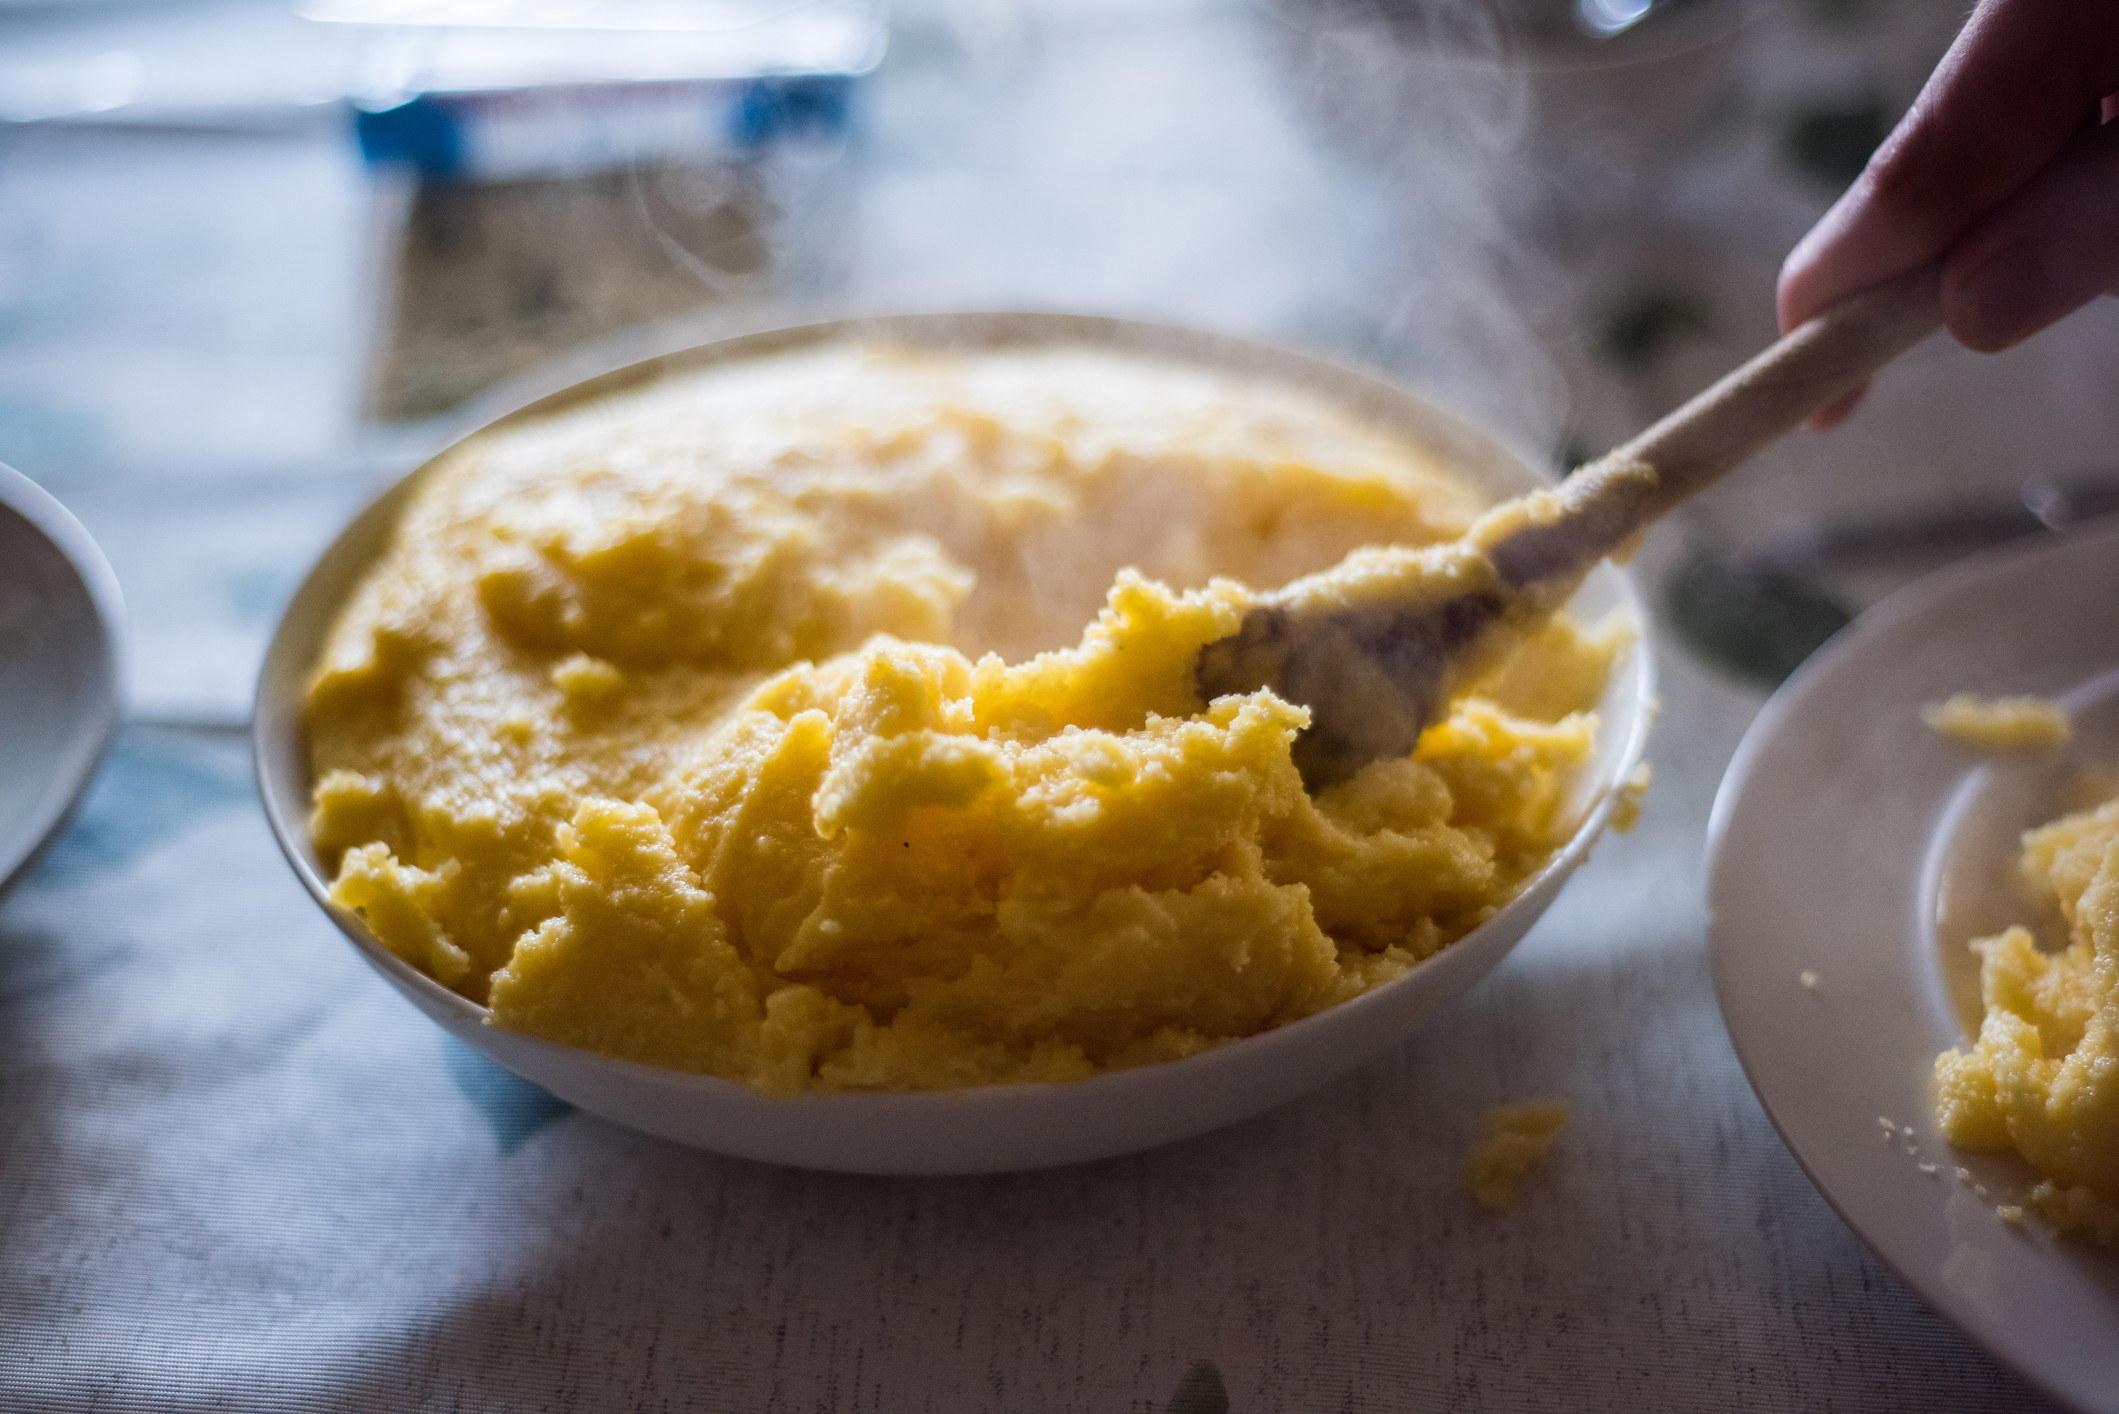 Serving polenta from a serving plate.